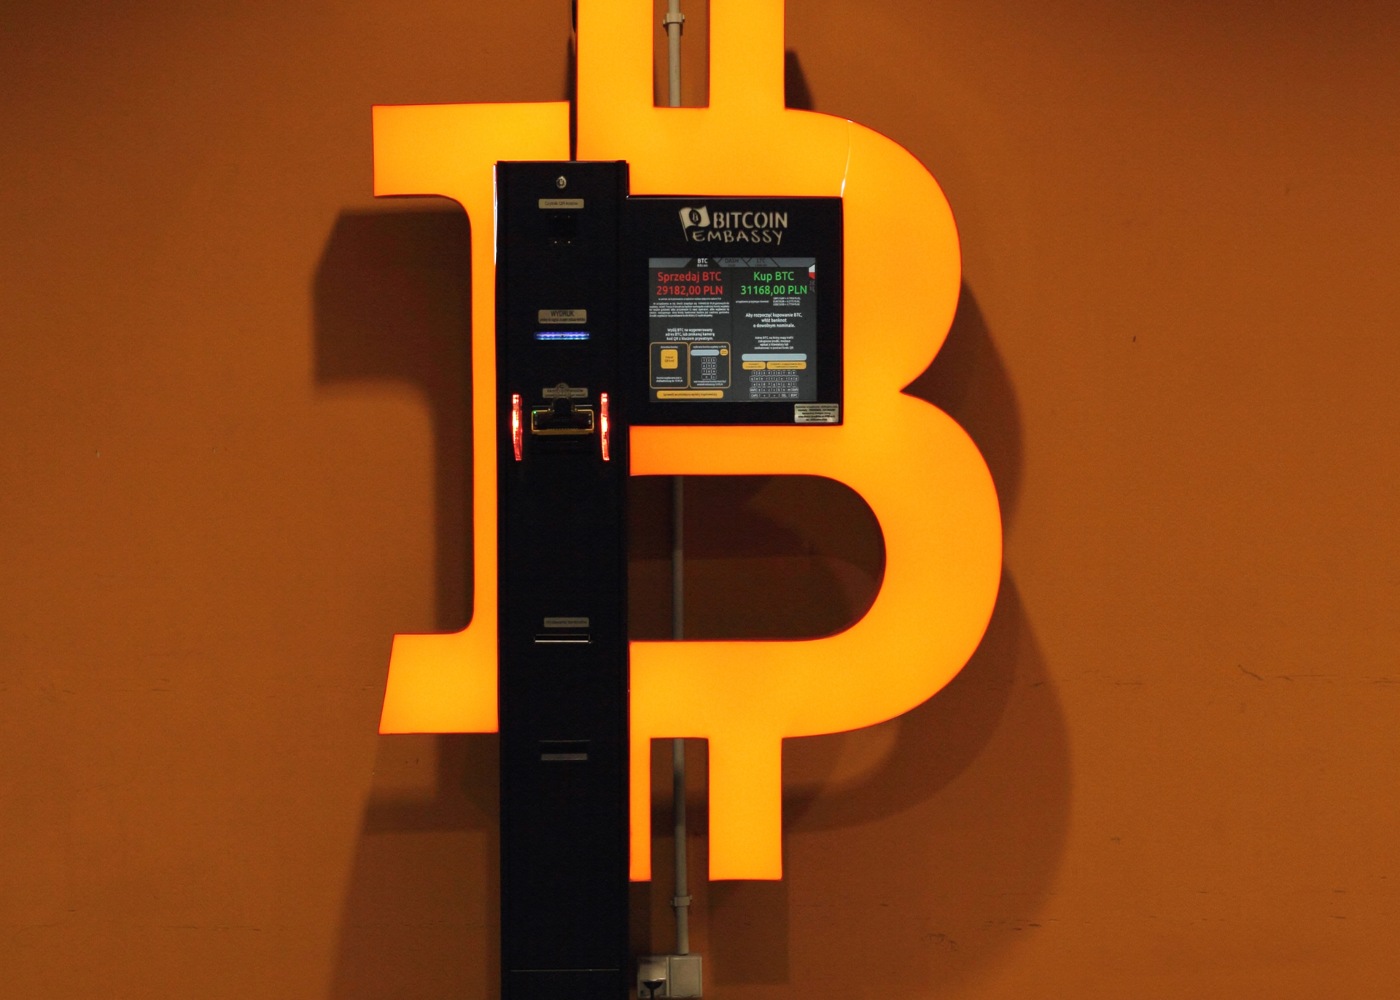 Dubai’s first Bitcoin ATM opens up currency debate